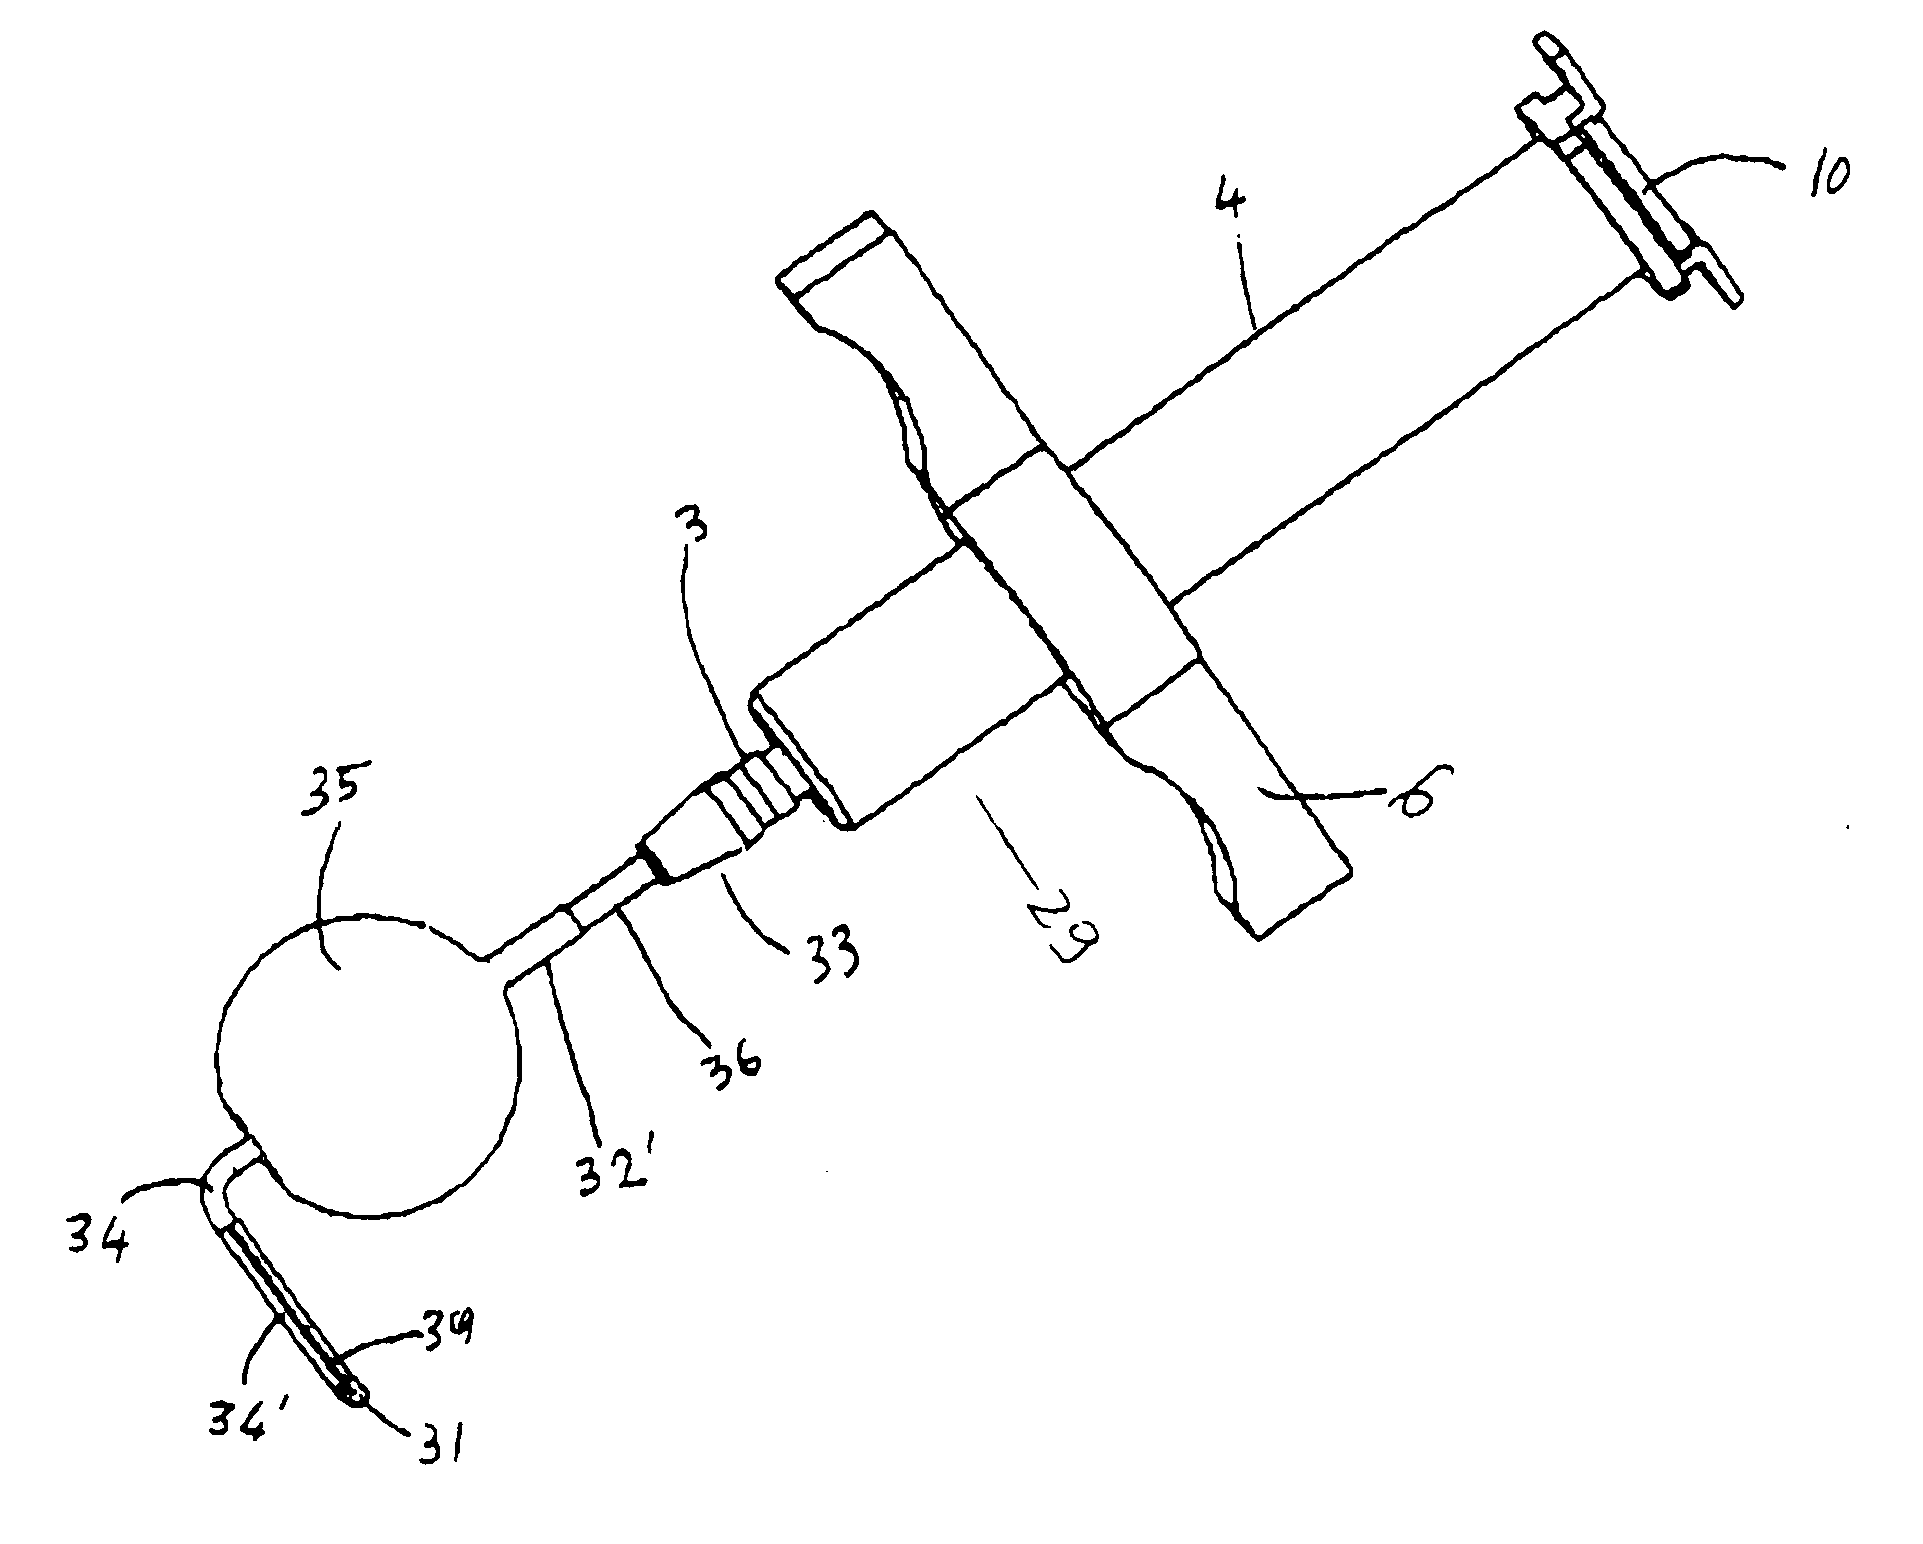 Infra-epidermic subcision device for blunt dissection of sub-epidermic tissues